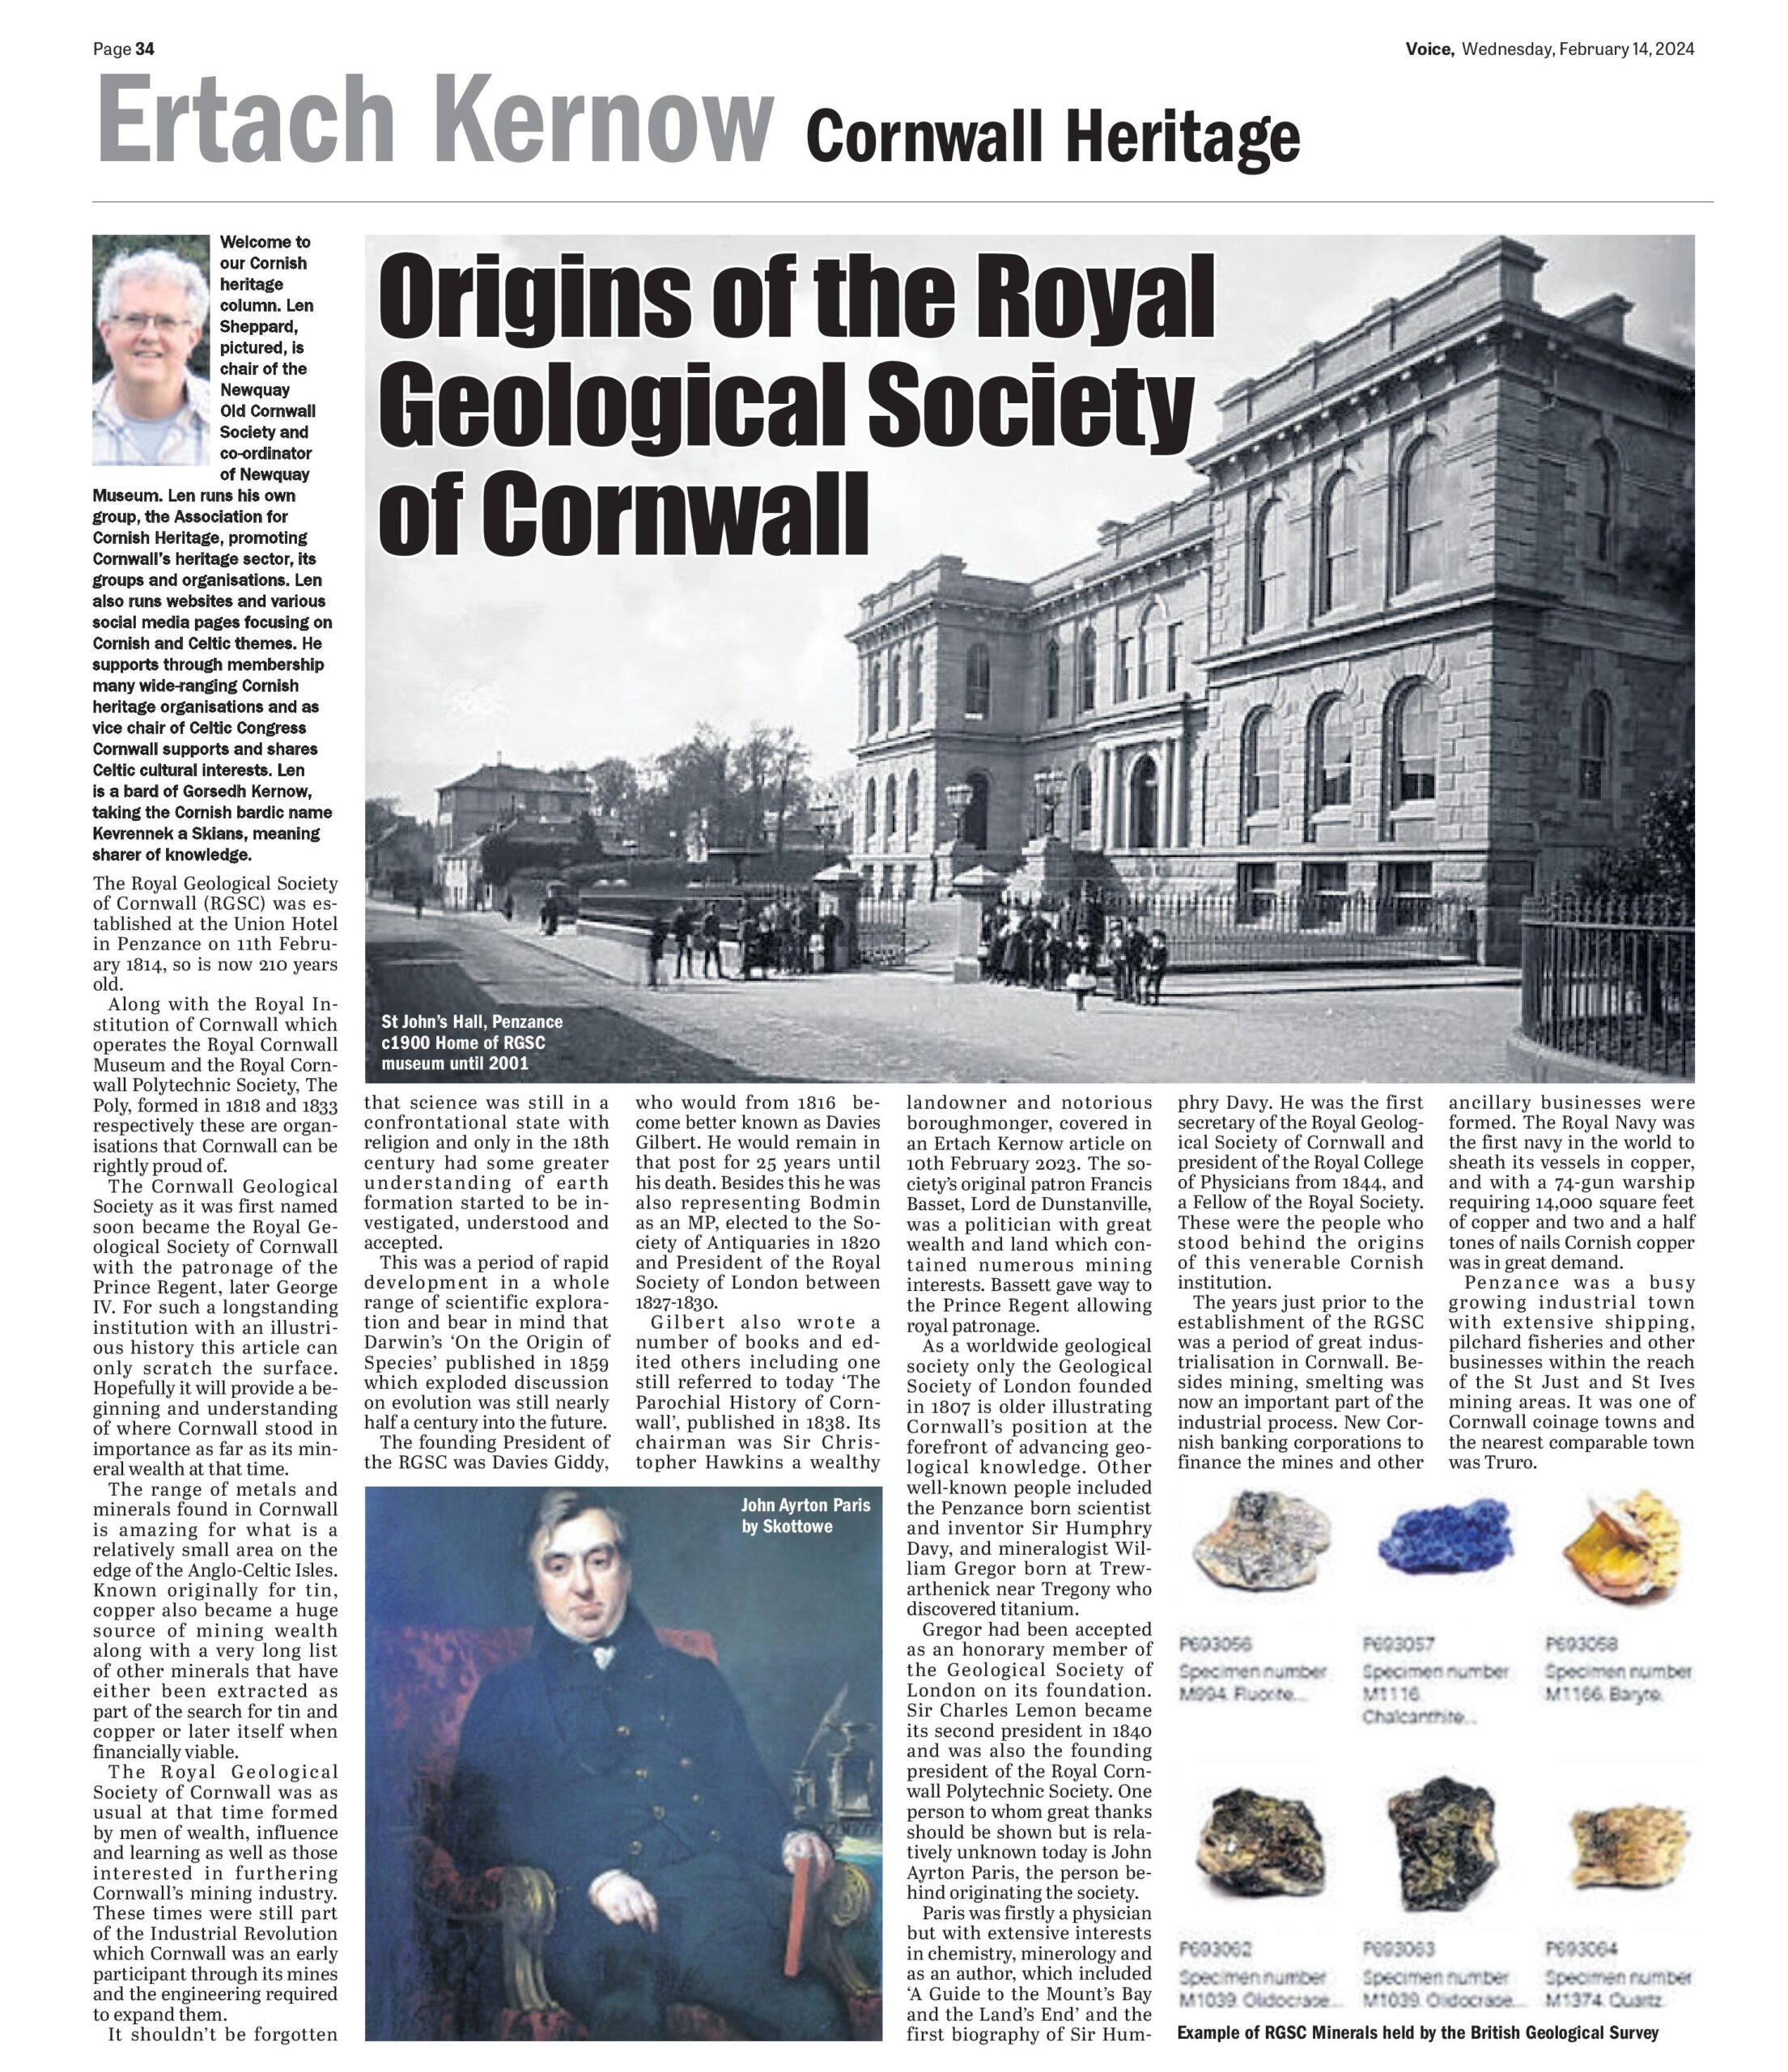 Origins of the Royal Geological Society of Cornwall